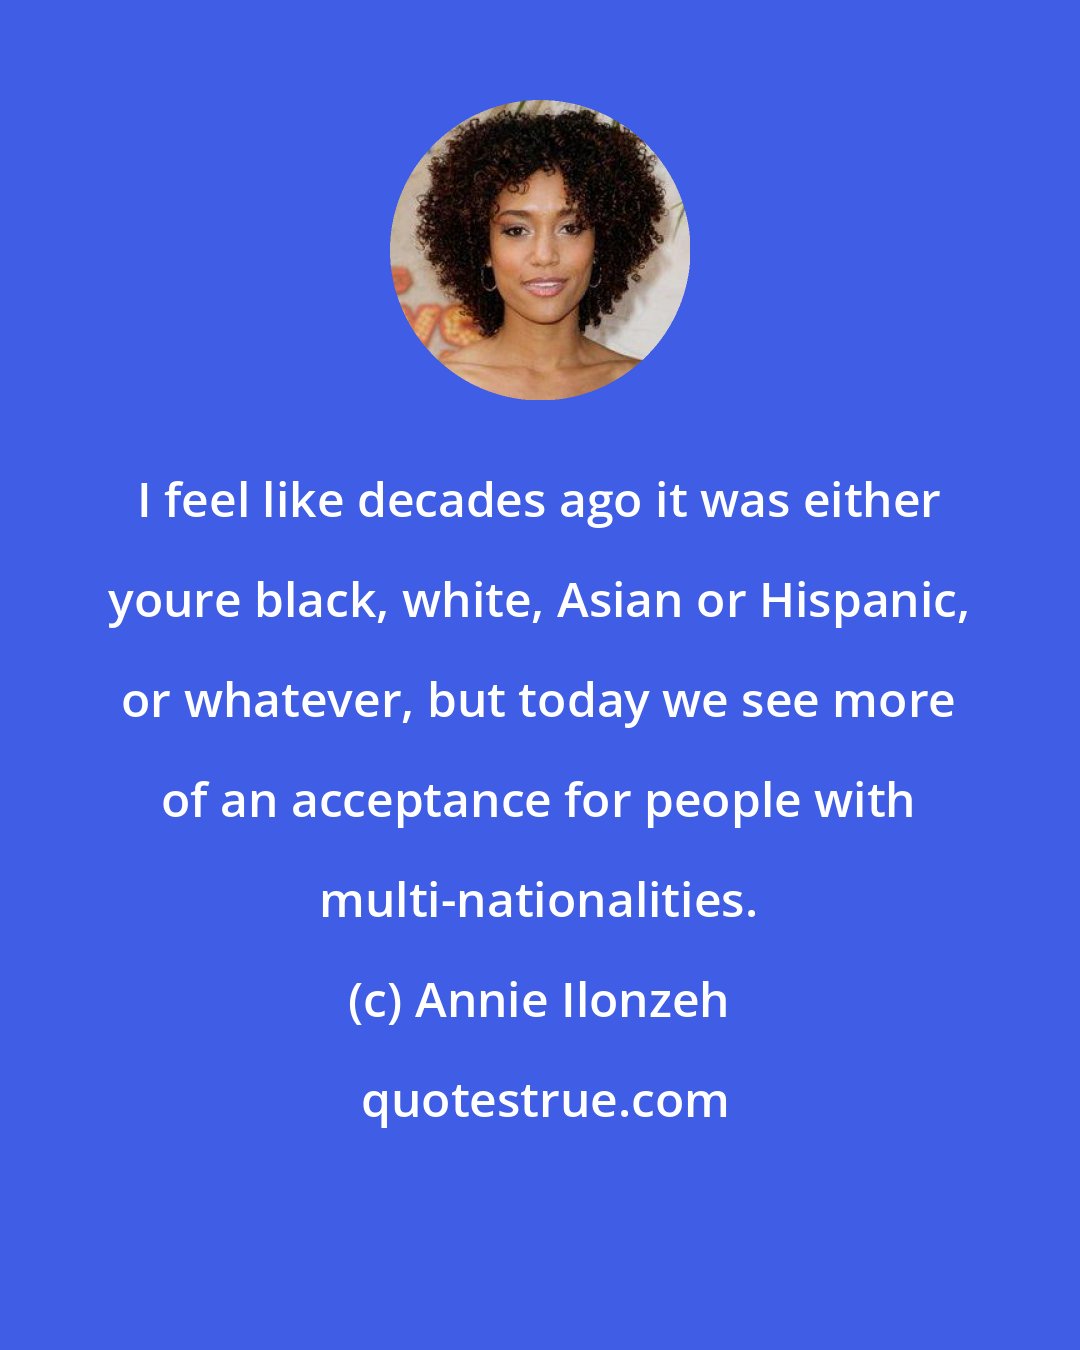 Annie Ilonzeh: I feel like decades ago it was either youre black, white, Asian or Hispanic, or whatever, but today we see more of an acceptance for people with multi-nationalities.